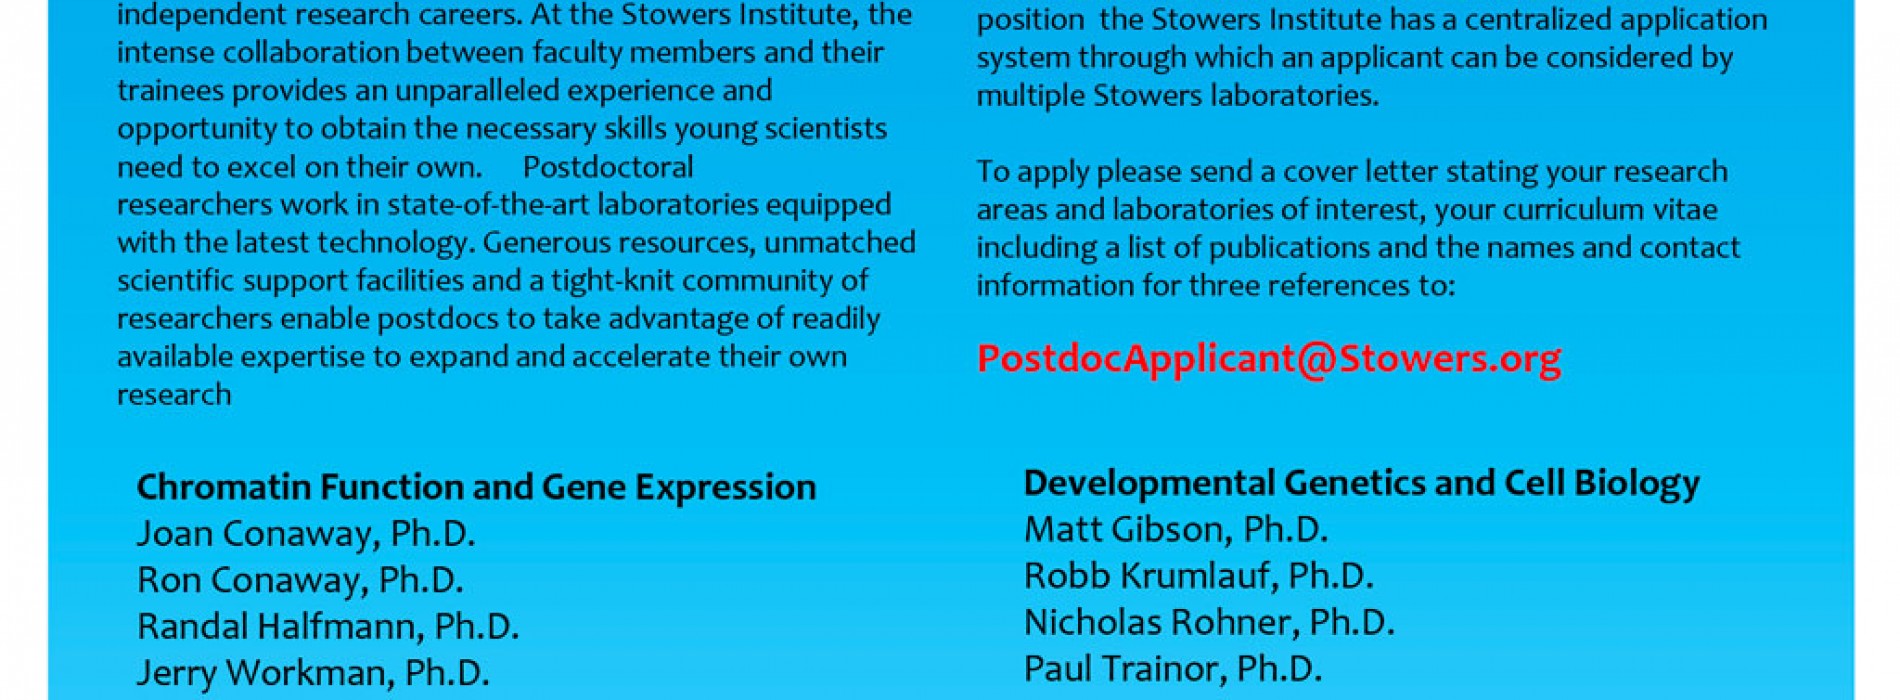 Postdoctoral Opportunities at the Stowers Institute